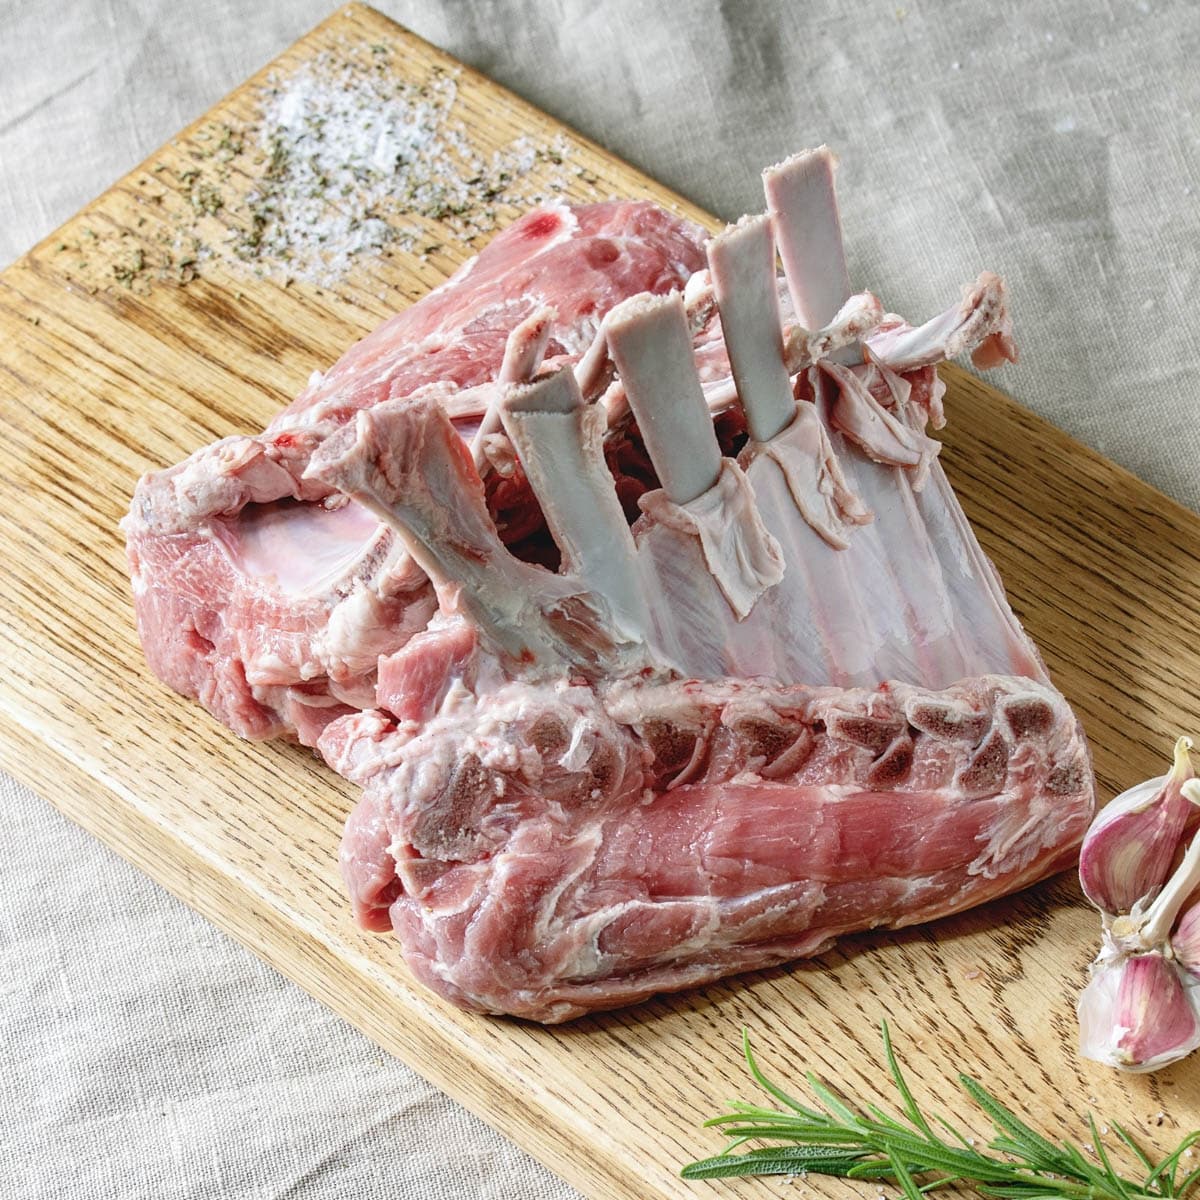 raw rack of lamb on a cutting board with fresh herbs and garlic.